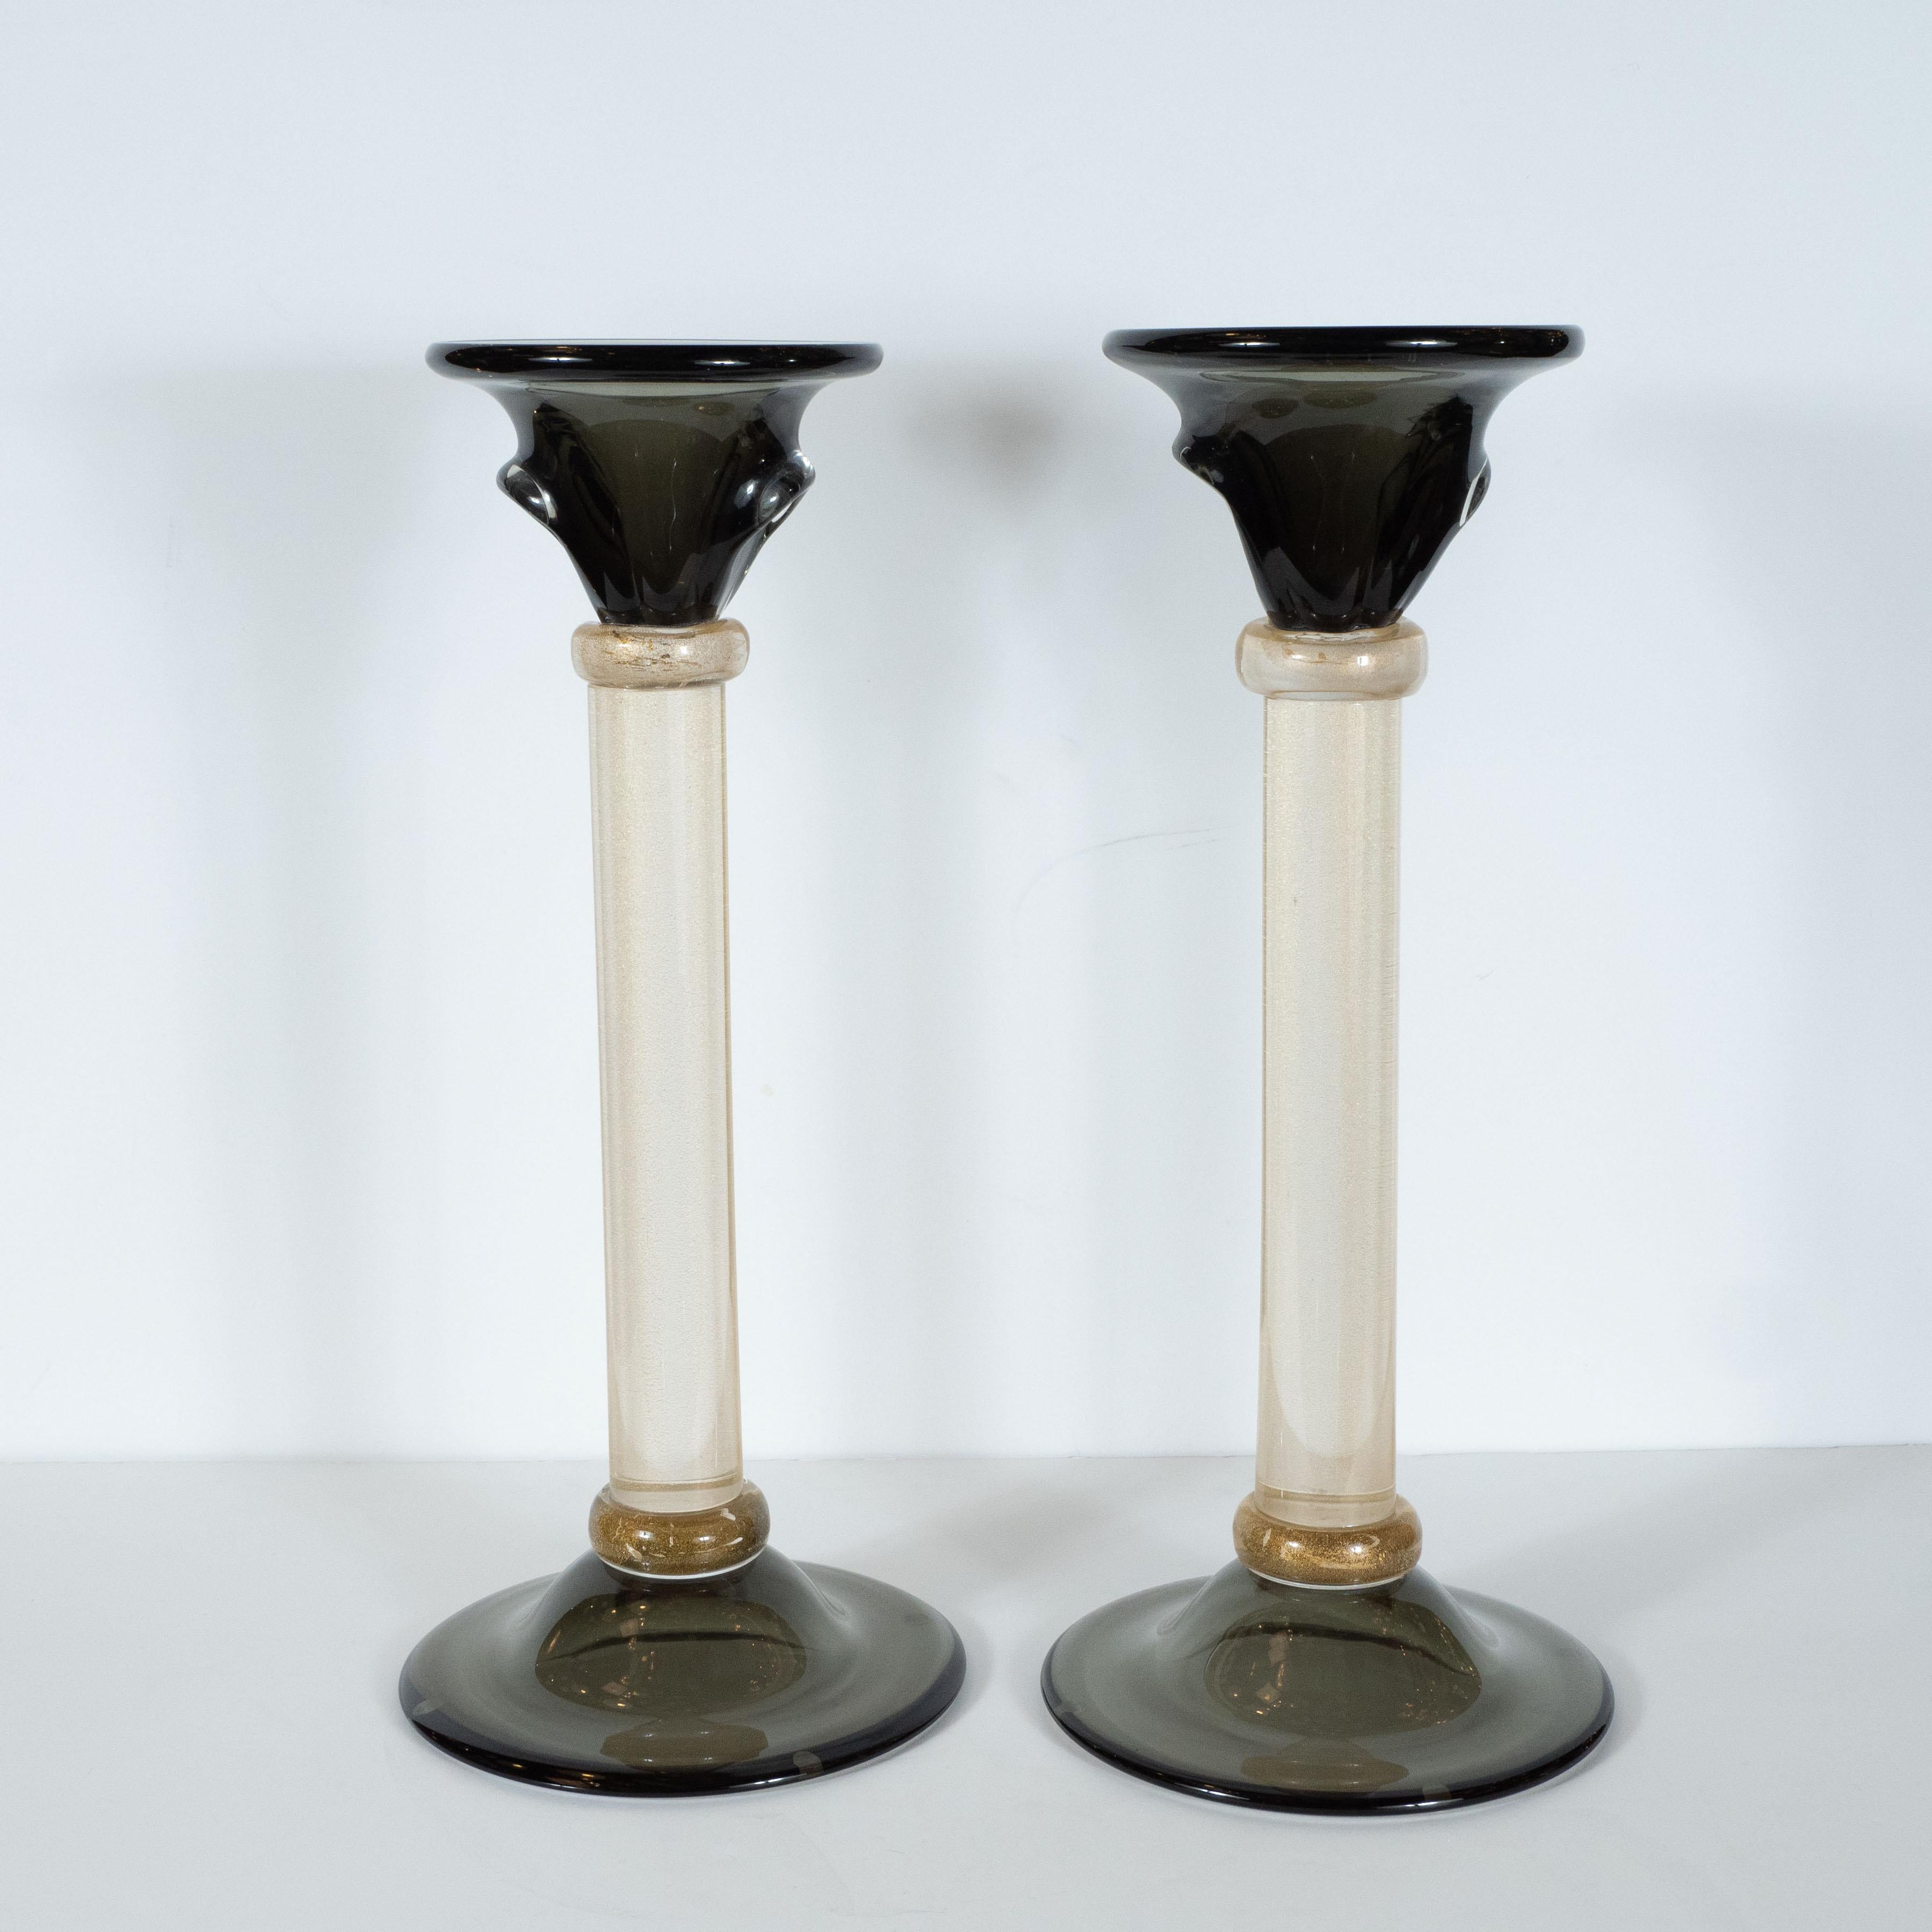 This stunning pair of candlesticks were realized in Murano, Italy- the island off the coast of Venice renowned for centuries for its superlative glass production. They feature subtly domed bases and urn form tops- with indented handles on each side-